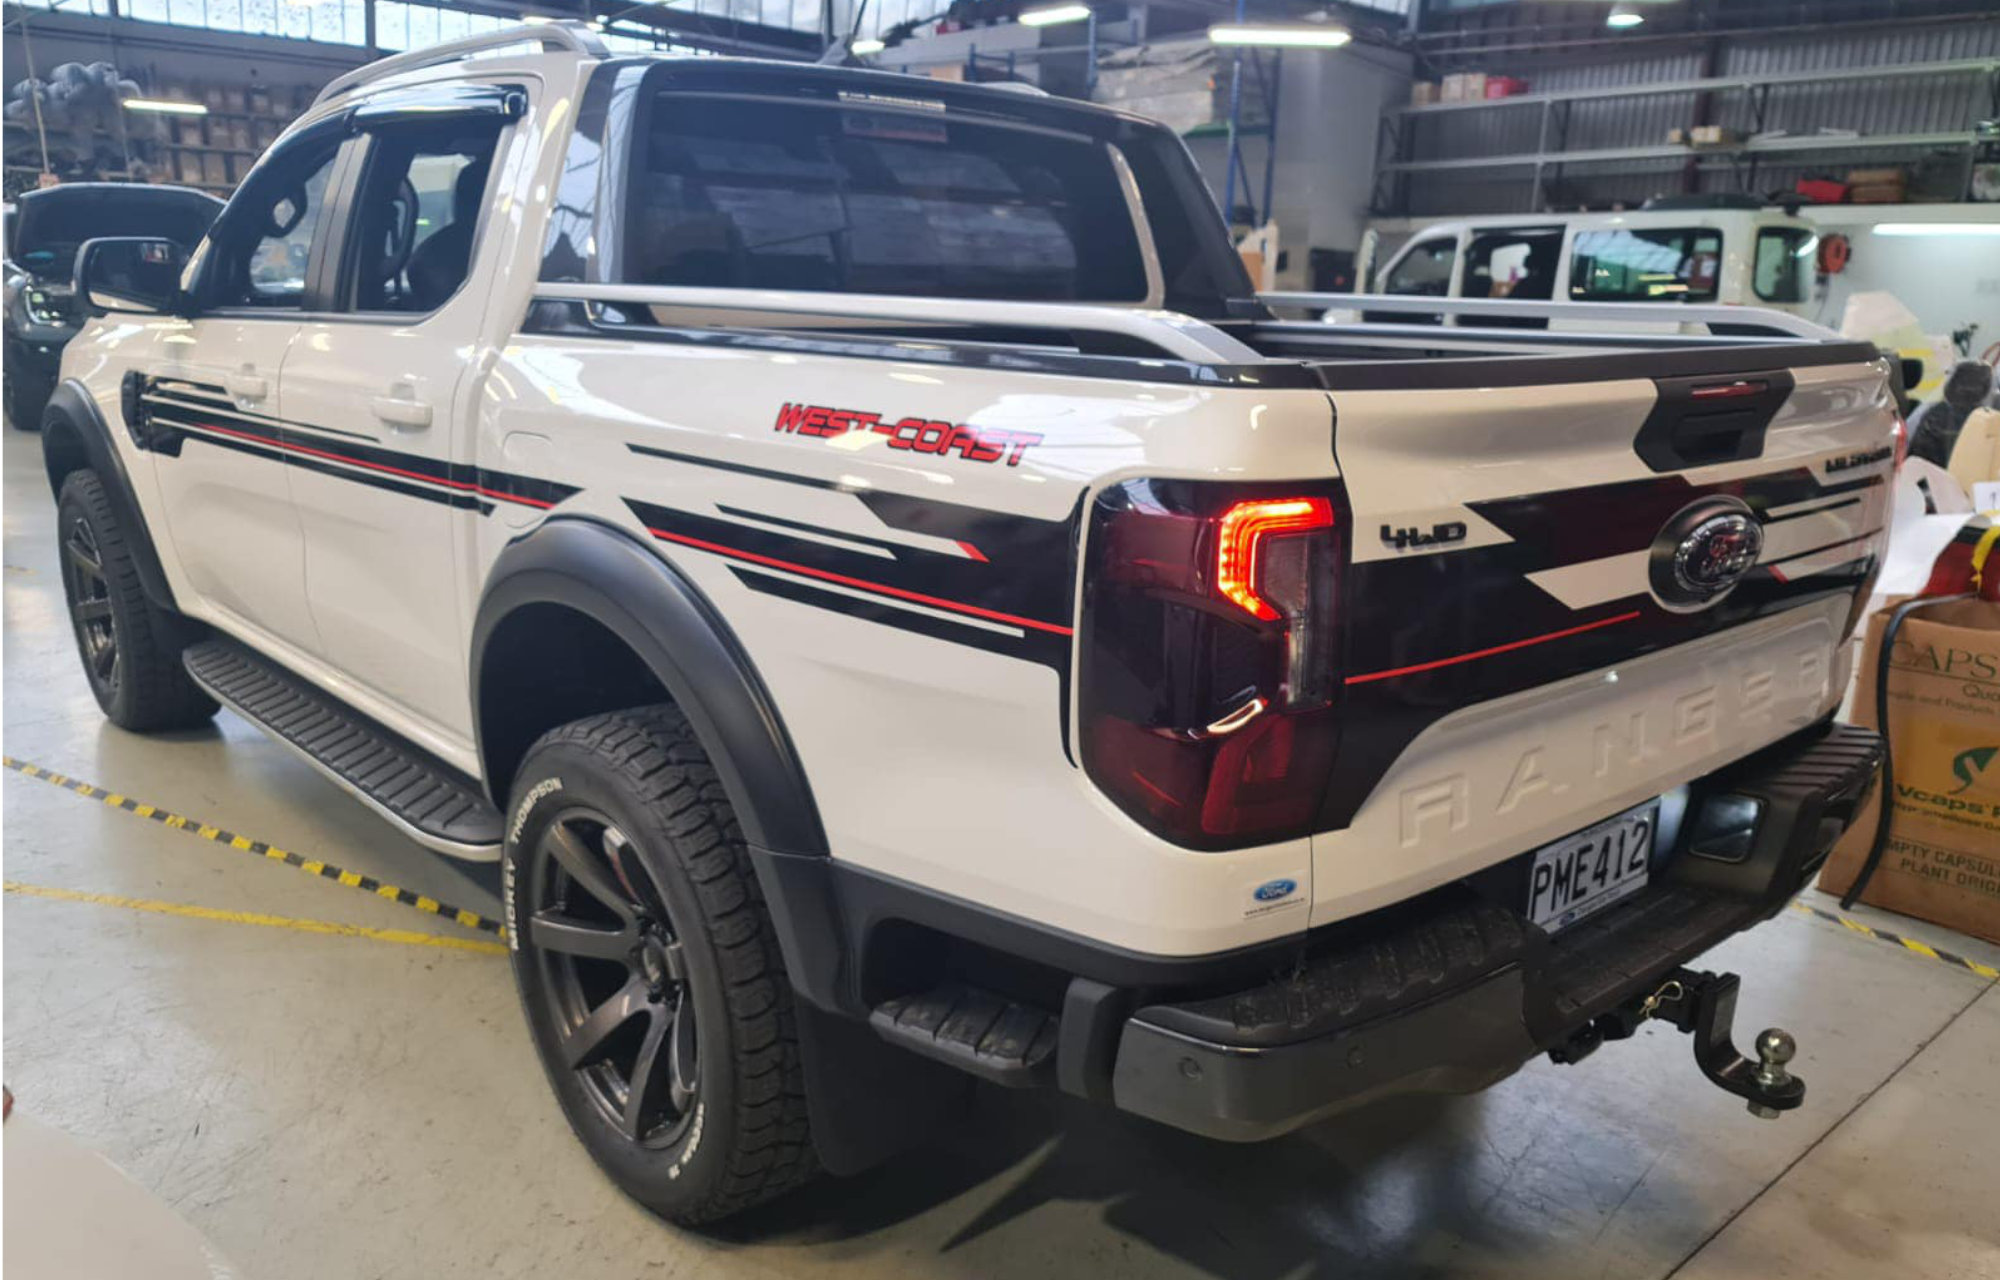 West Coast Edition Ford Ranger Rear View